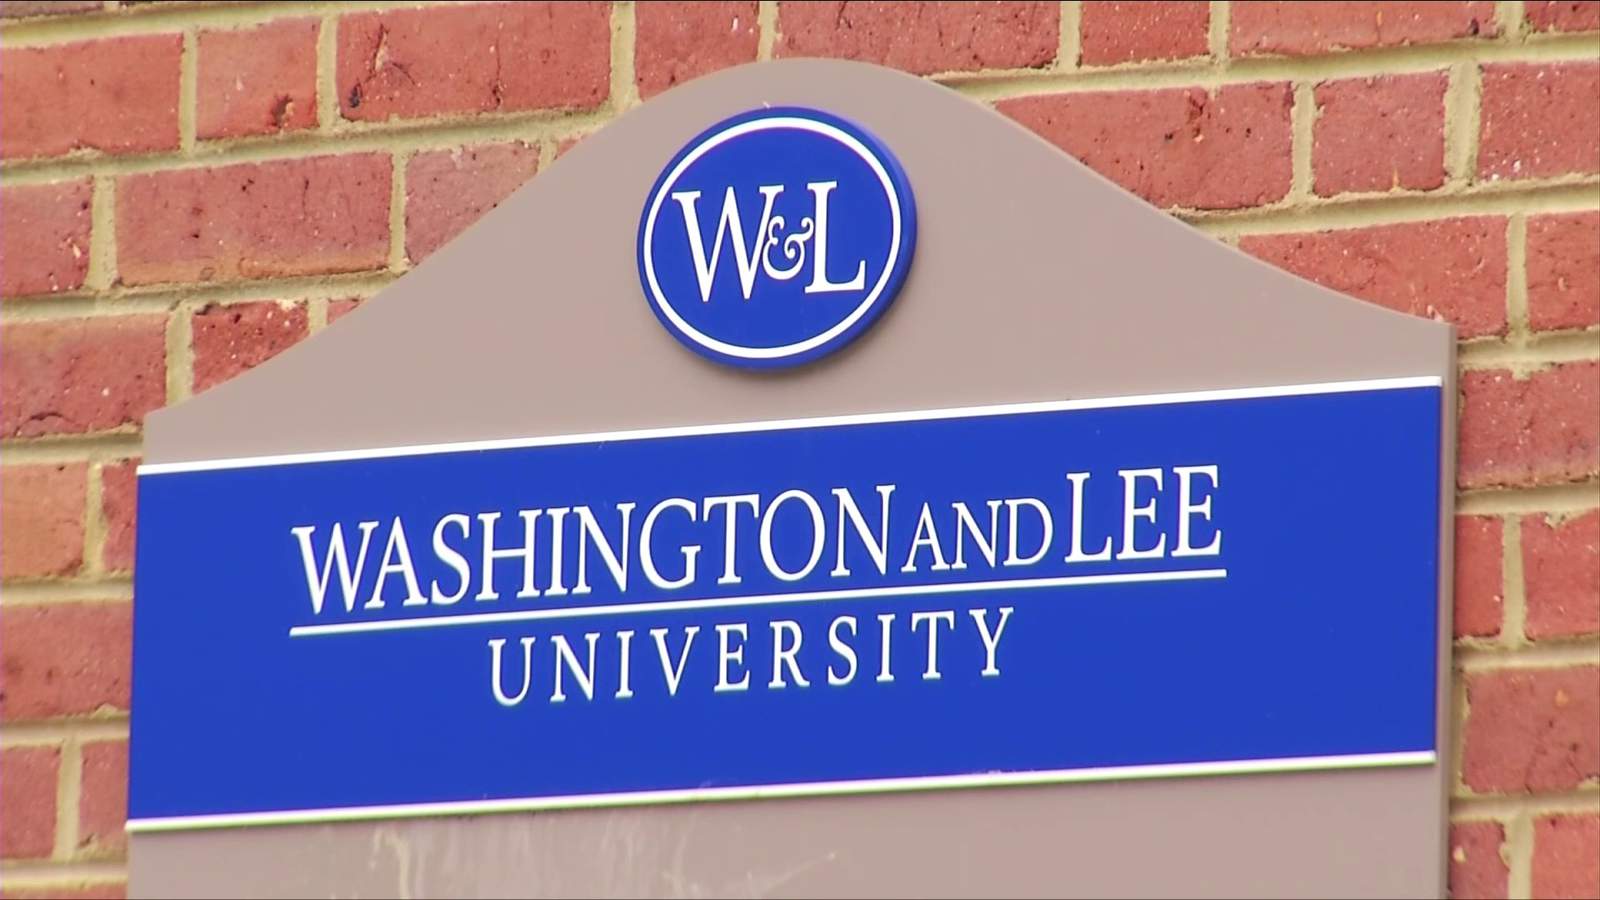 Debate continues over future of Washington and Lee’s name